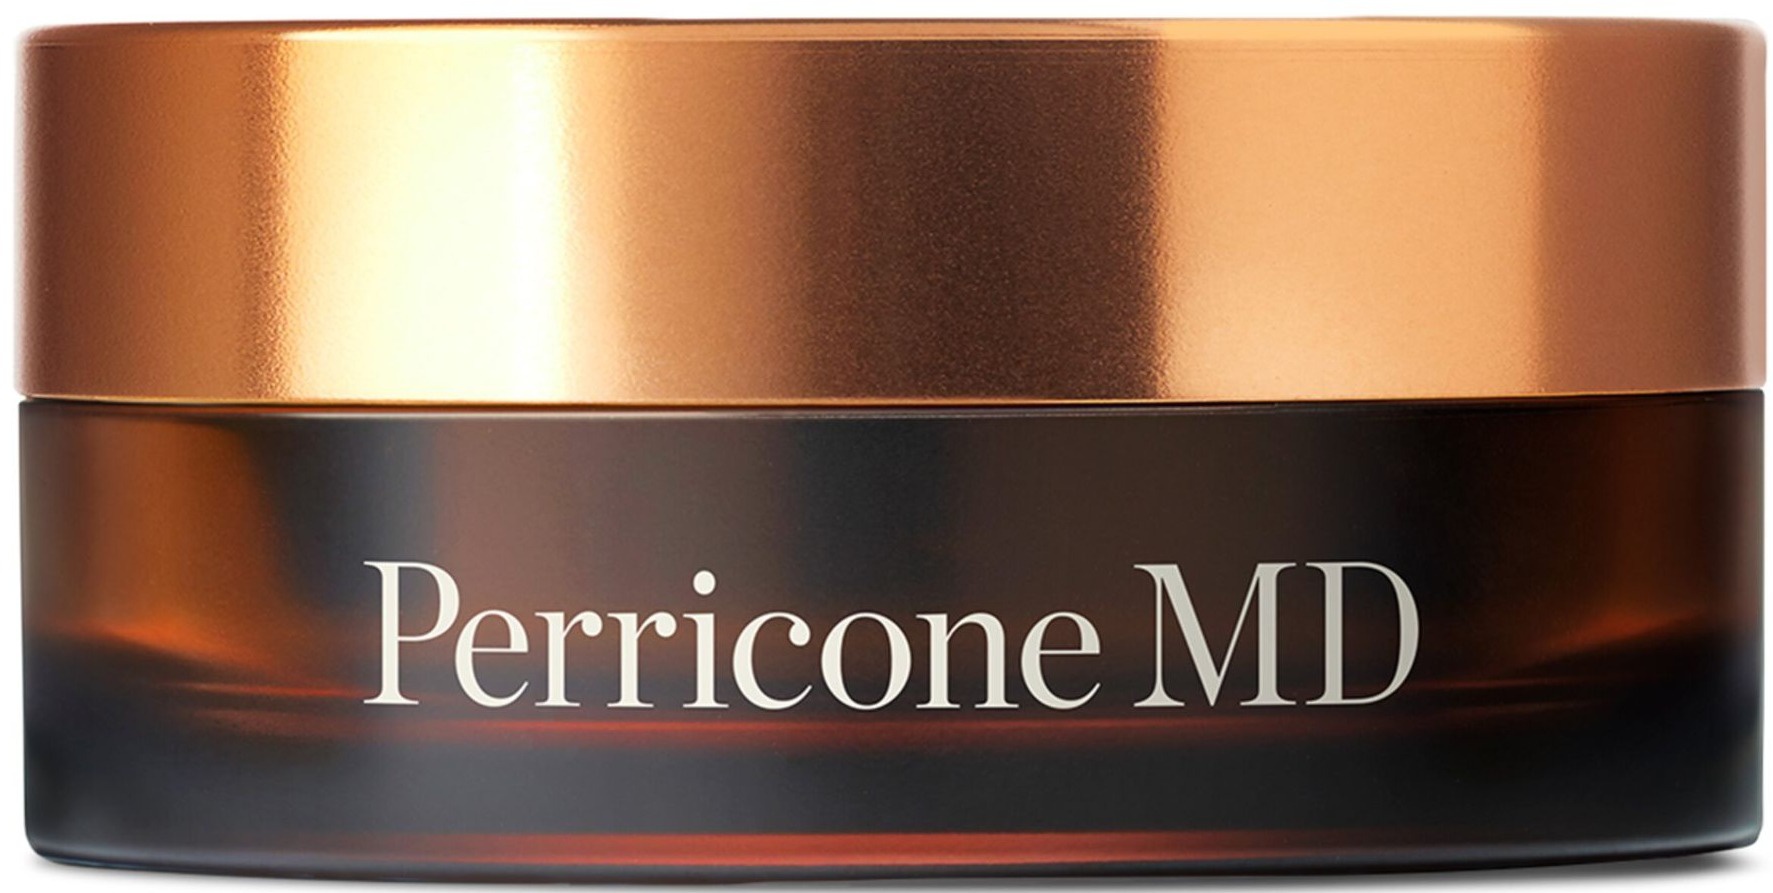 Perricone MD Cleansing Balm